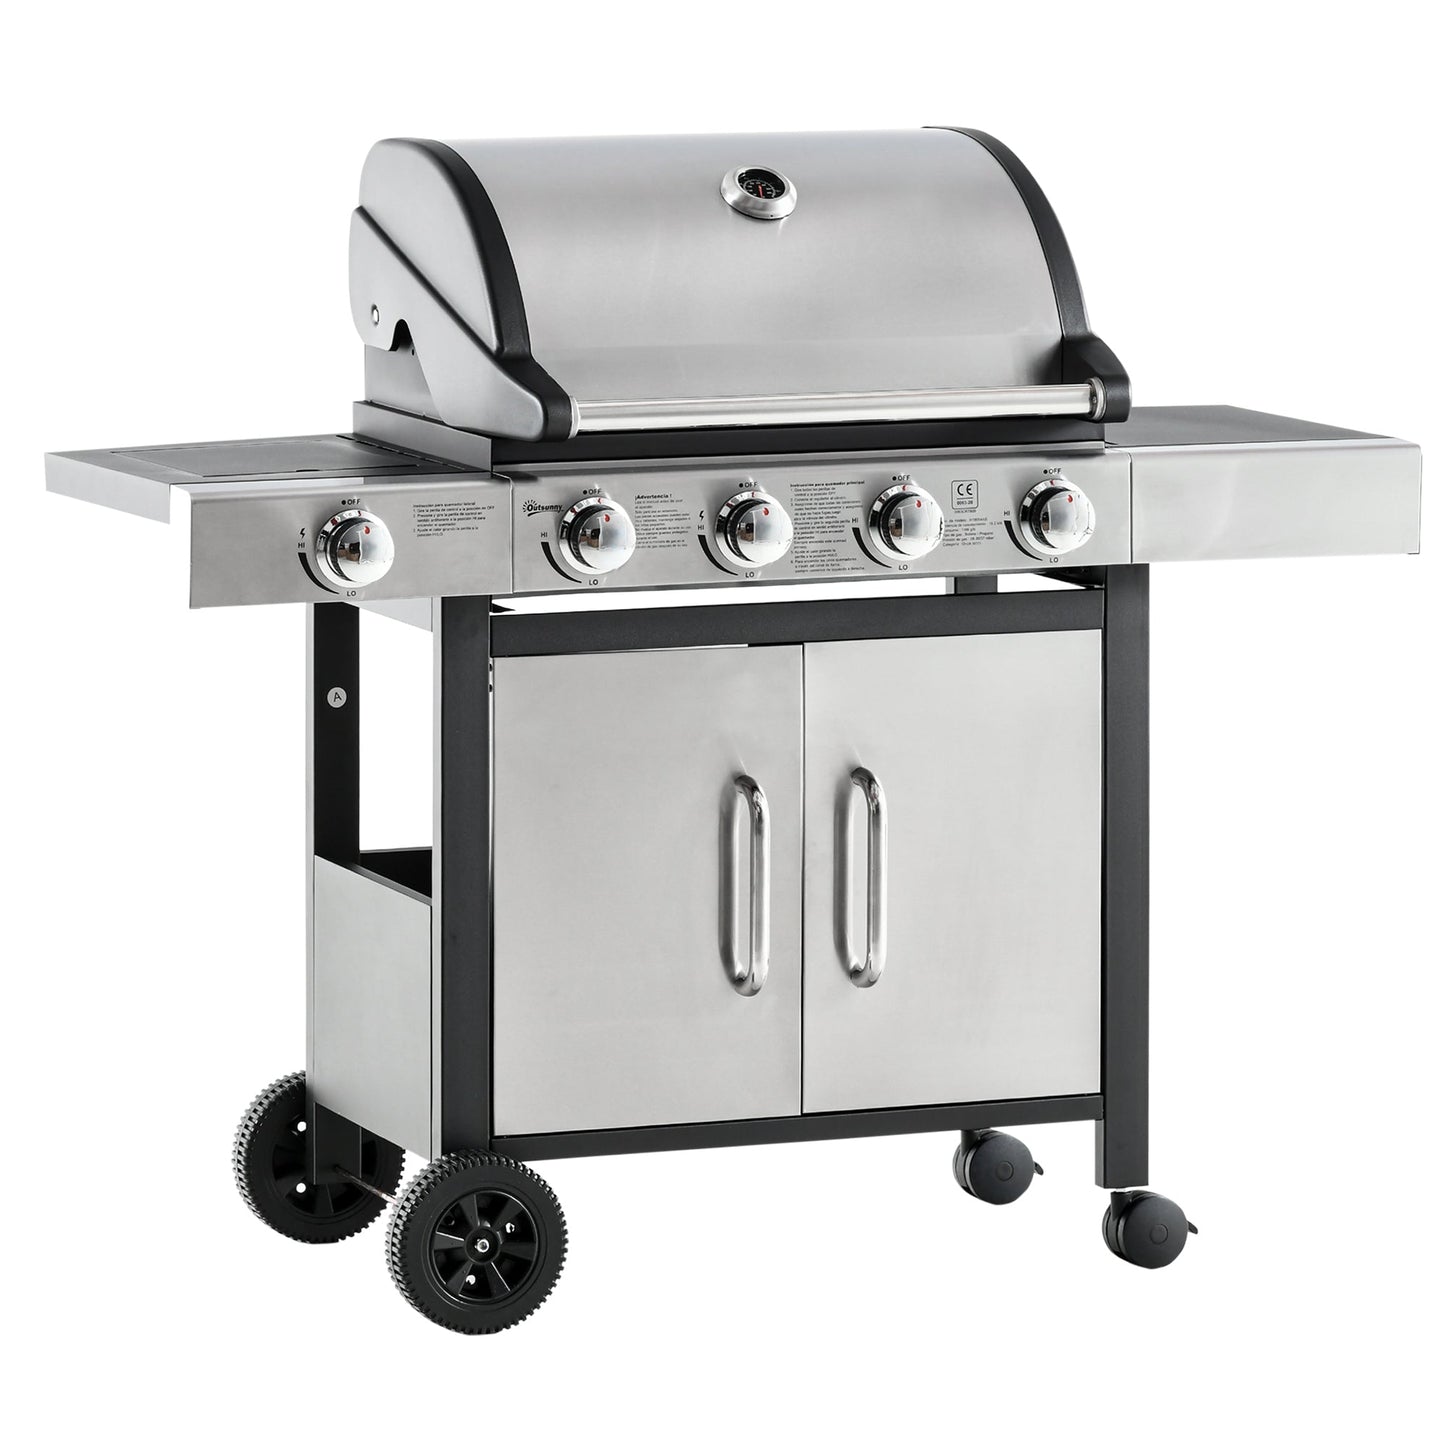 Silver Gas Barbecue 15.2kw Burners